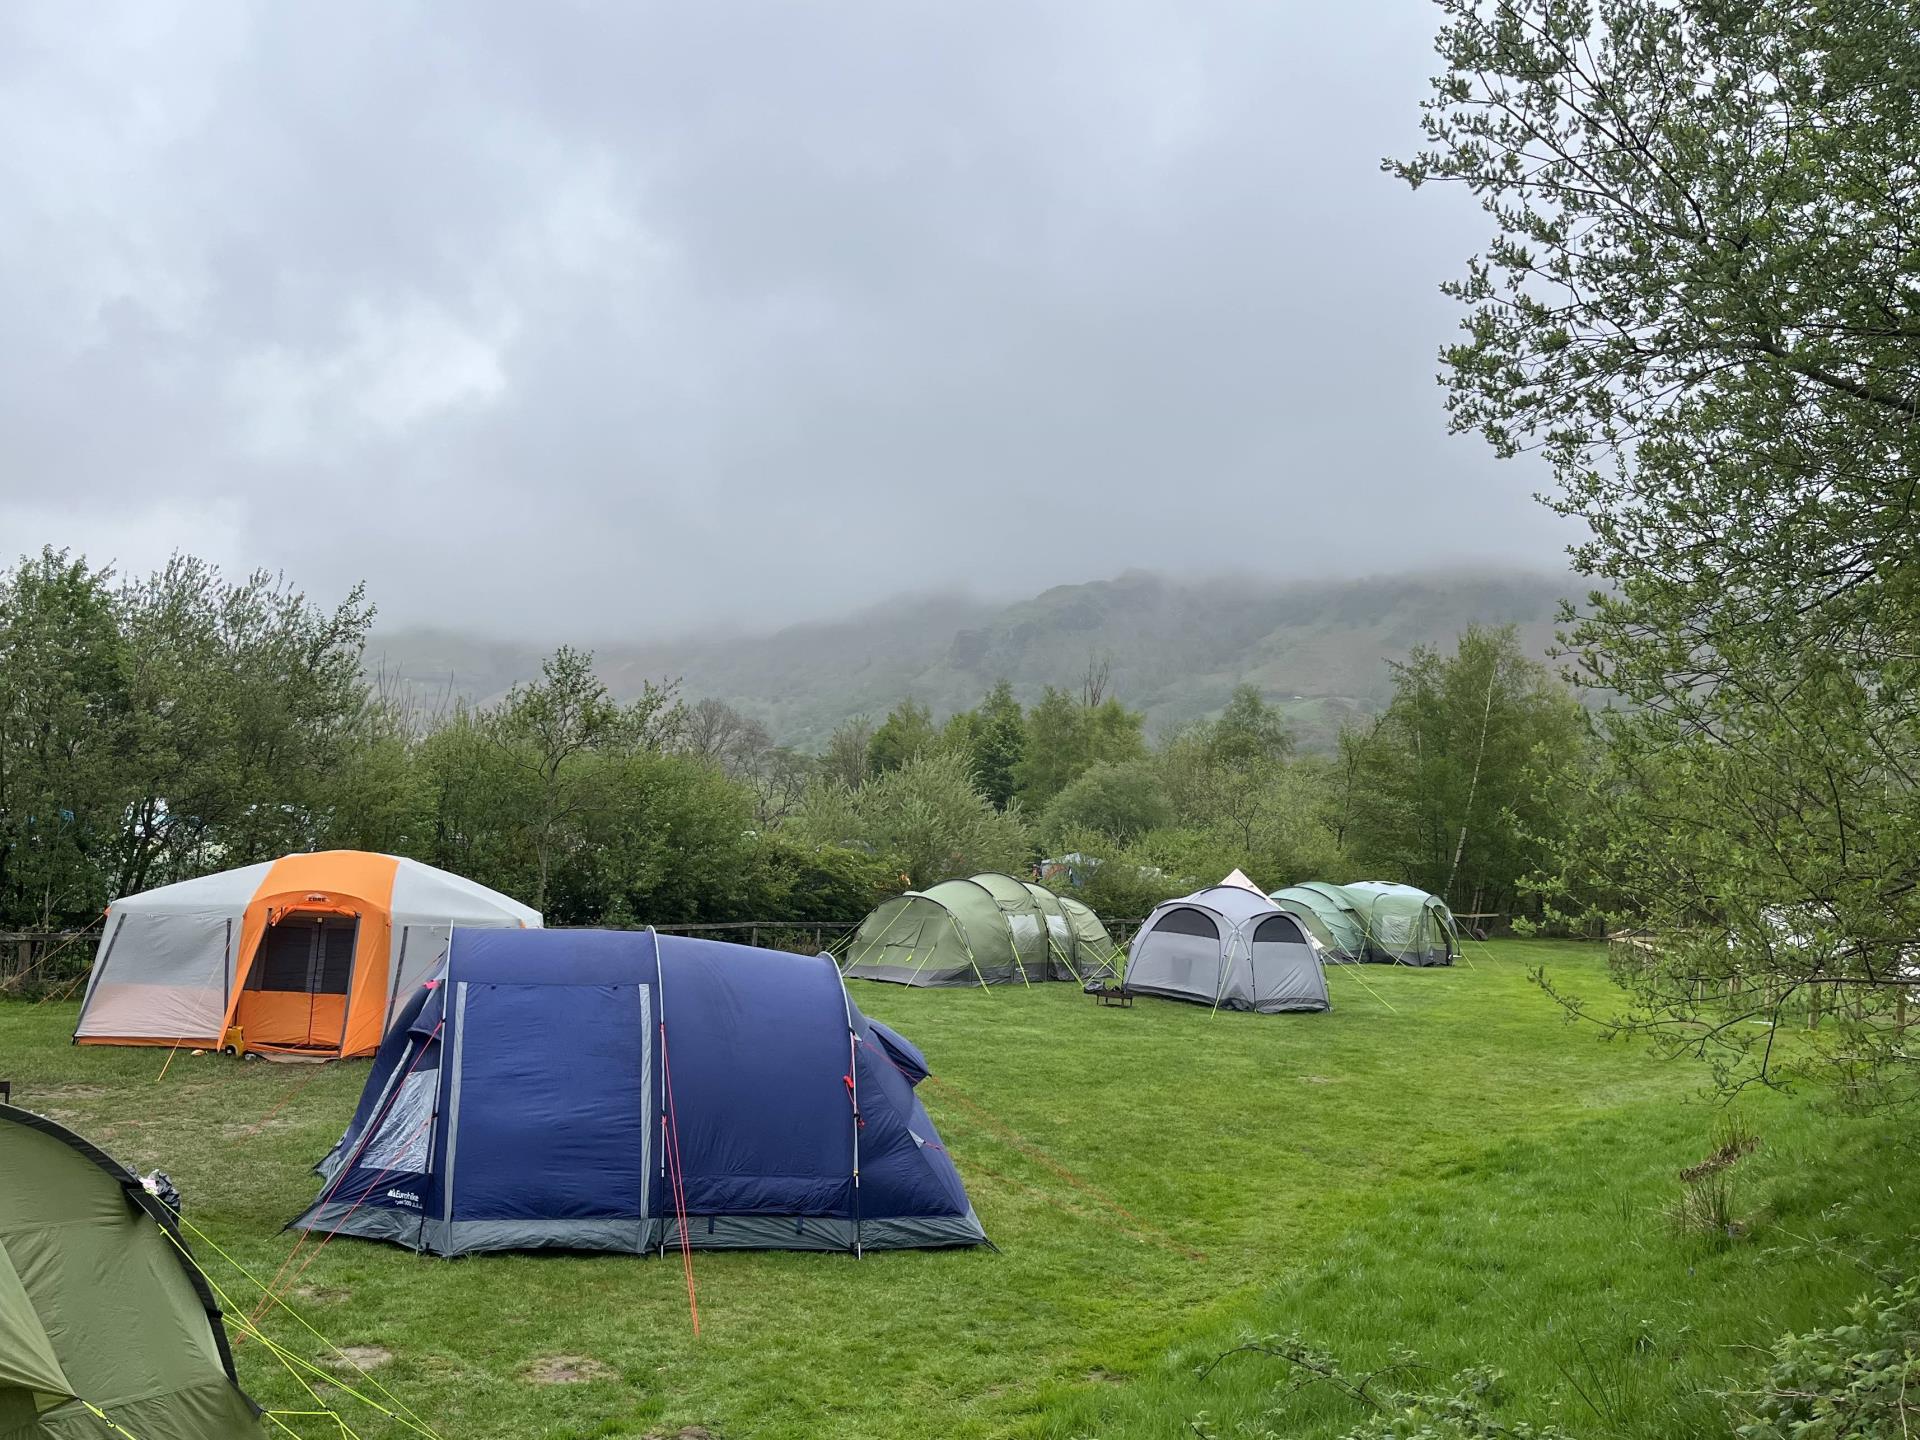 Four large camping fields